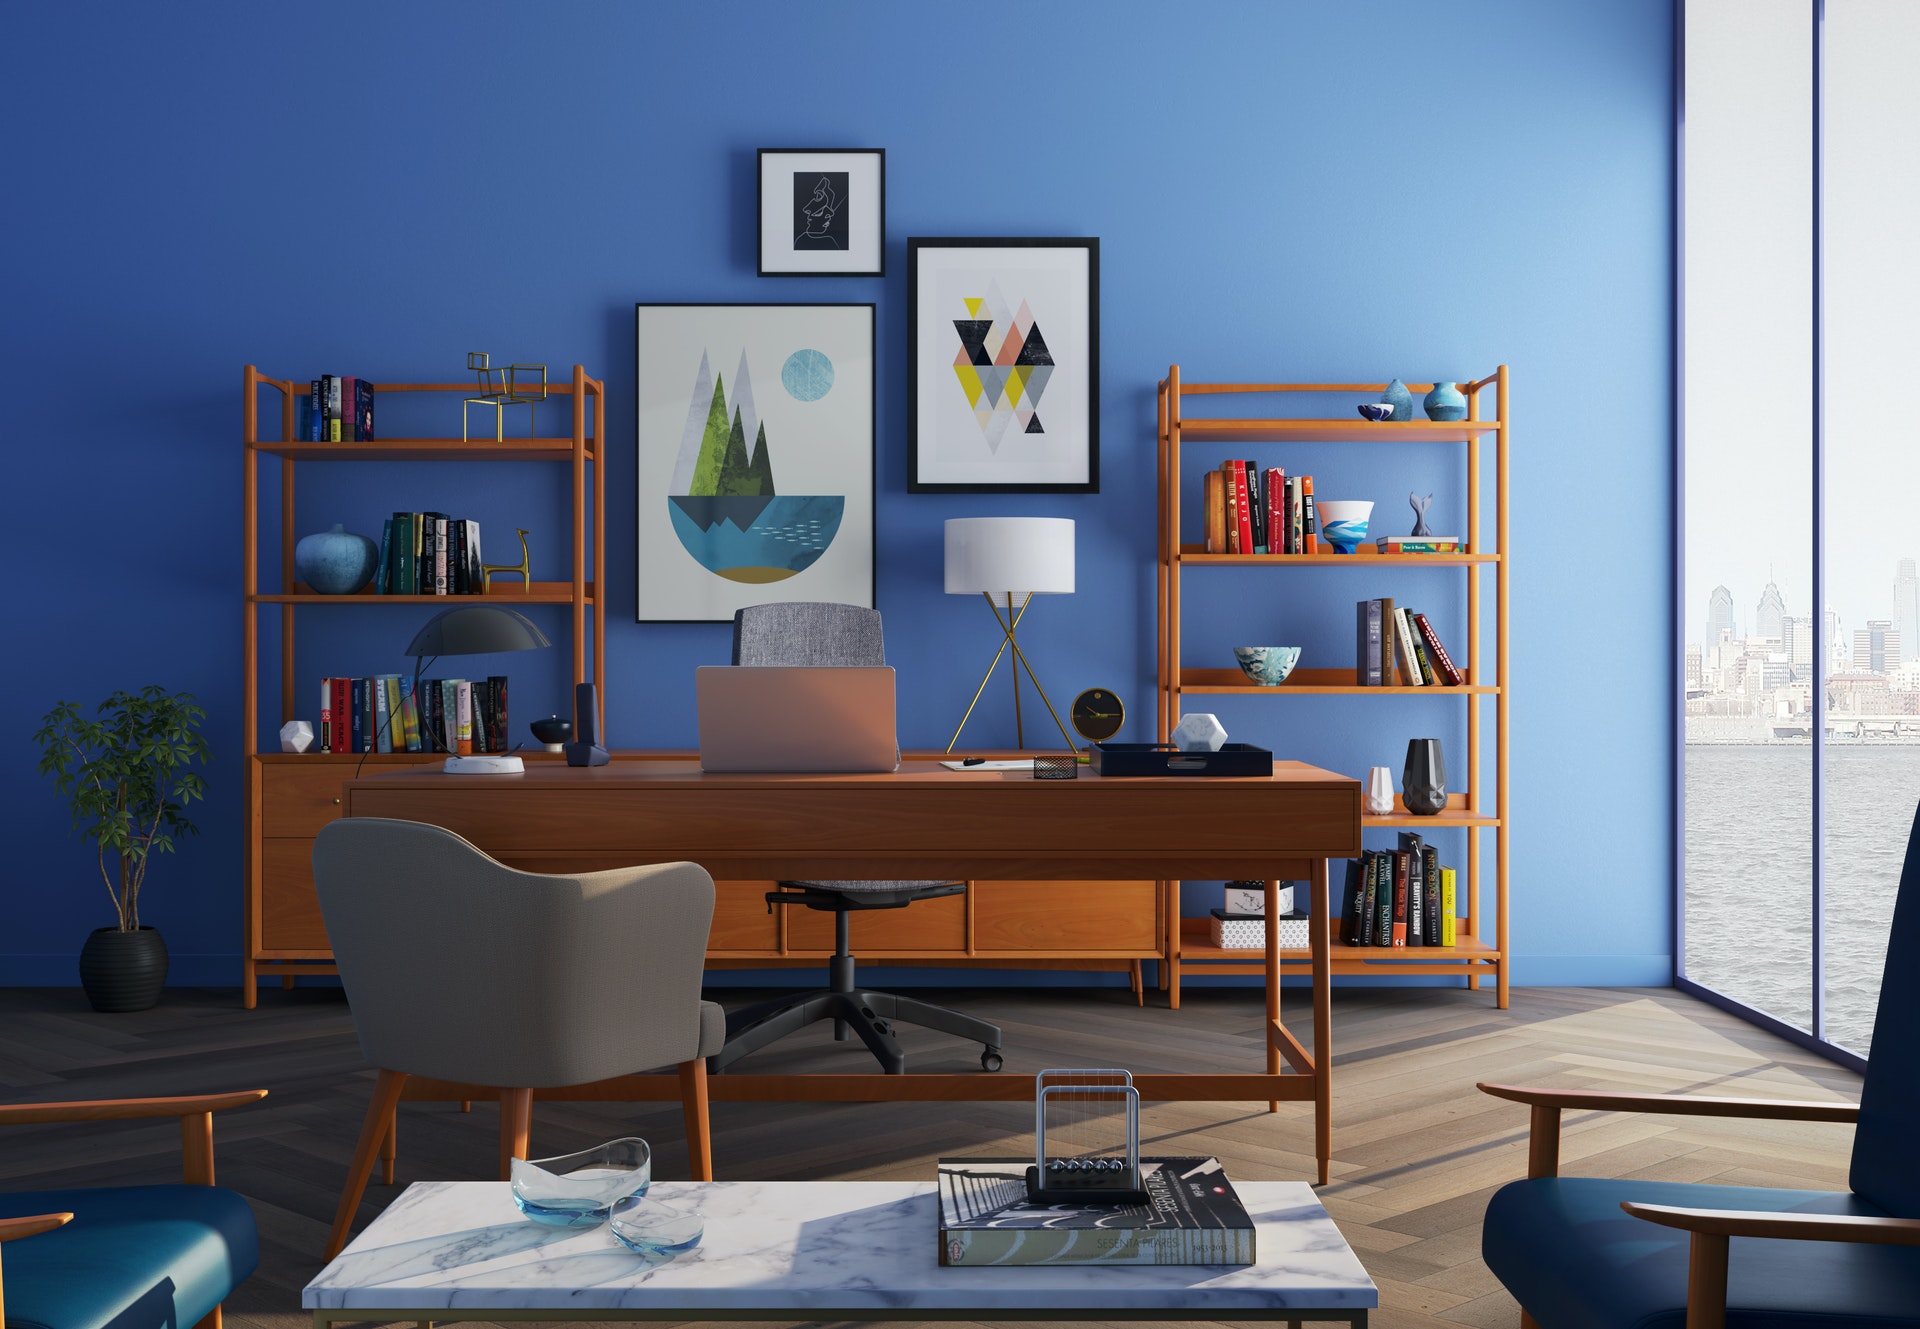 Interior office space blue walls